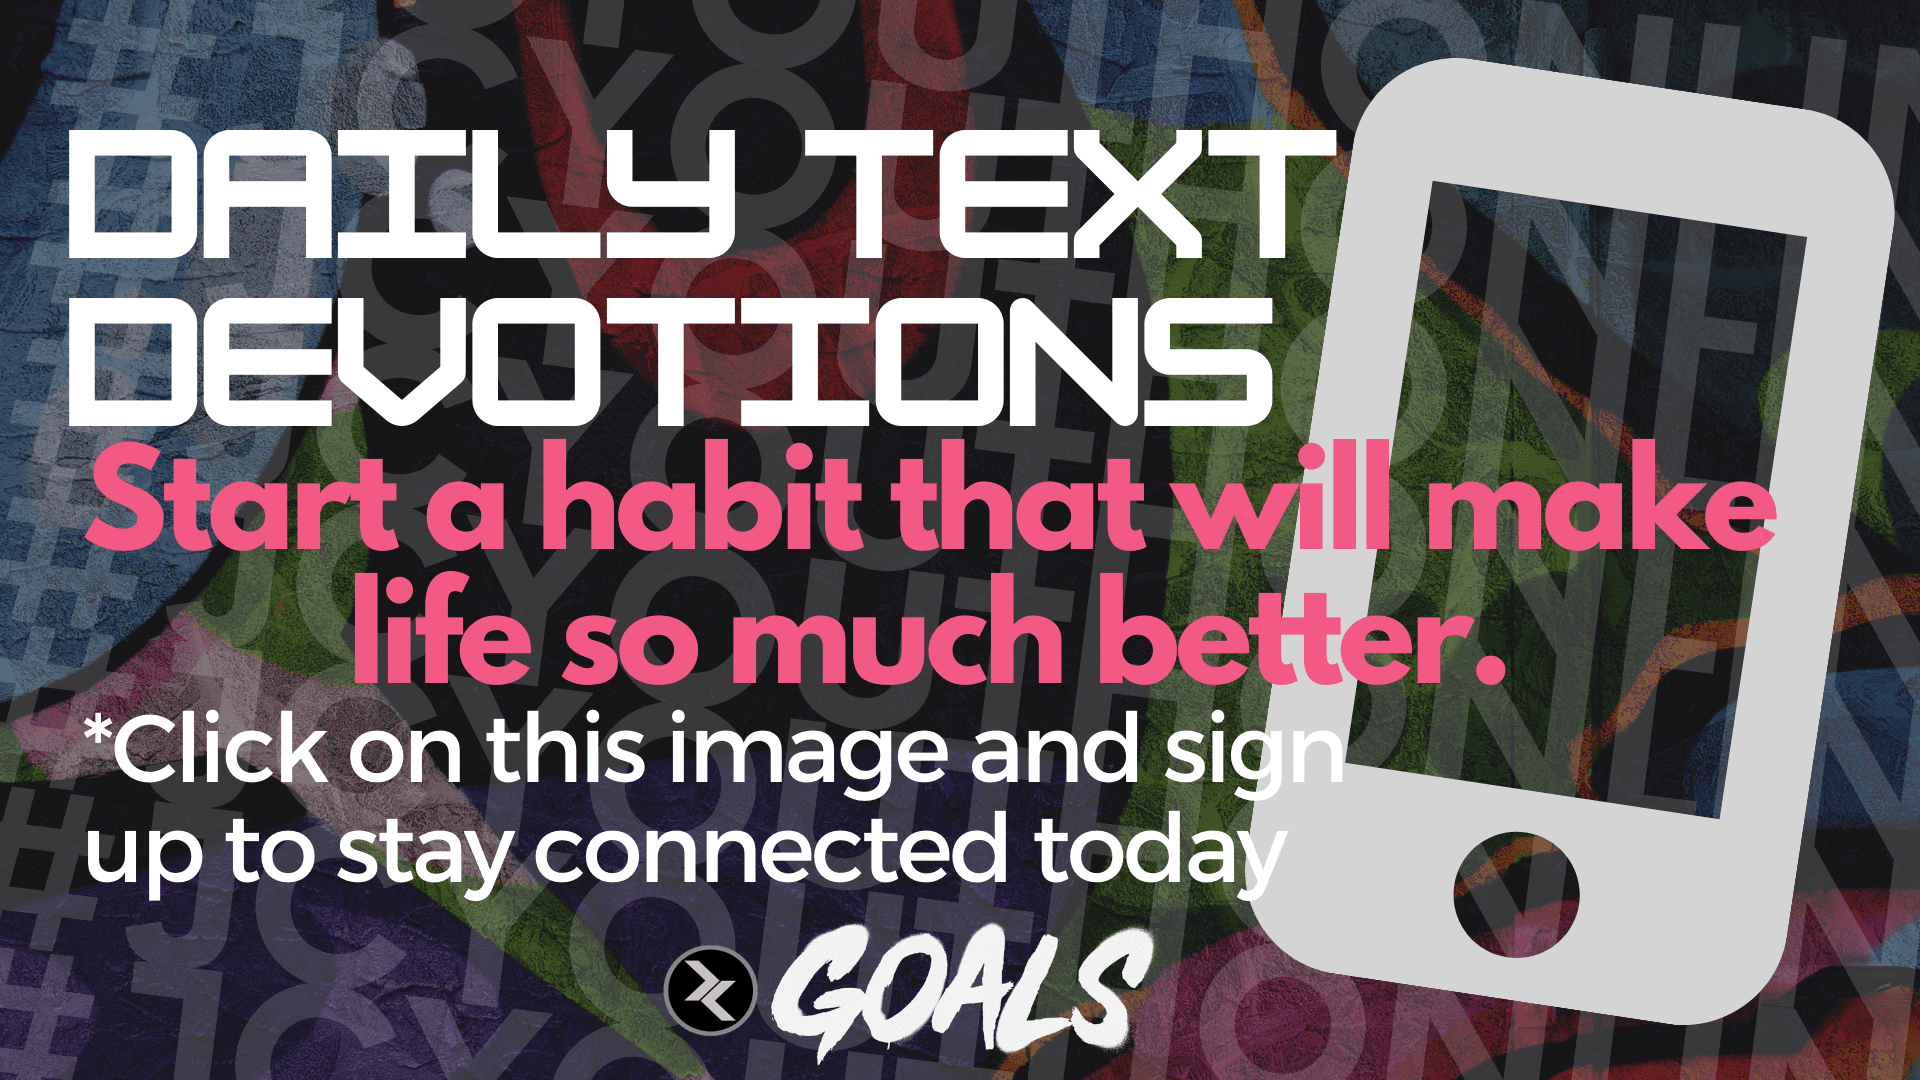 Want to start a habit that will change your life? Click the image above to sign up for our Daily Text Devotions and revolutionize your relationship with God.